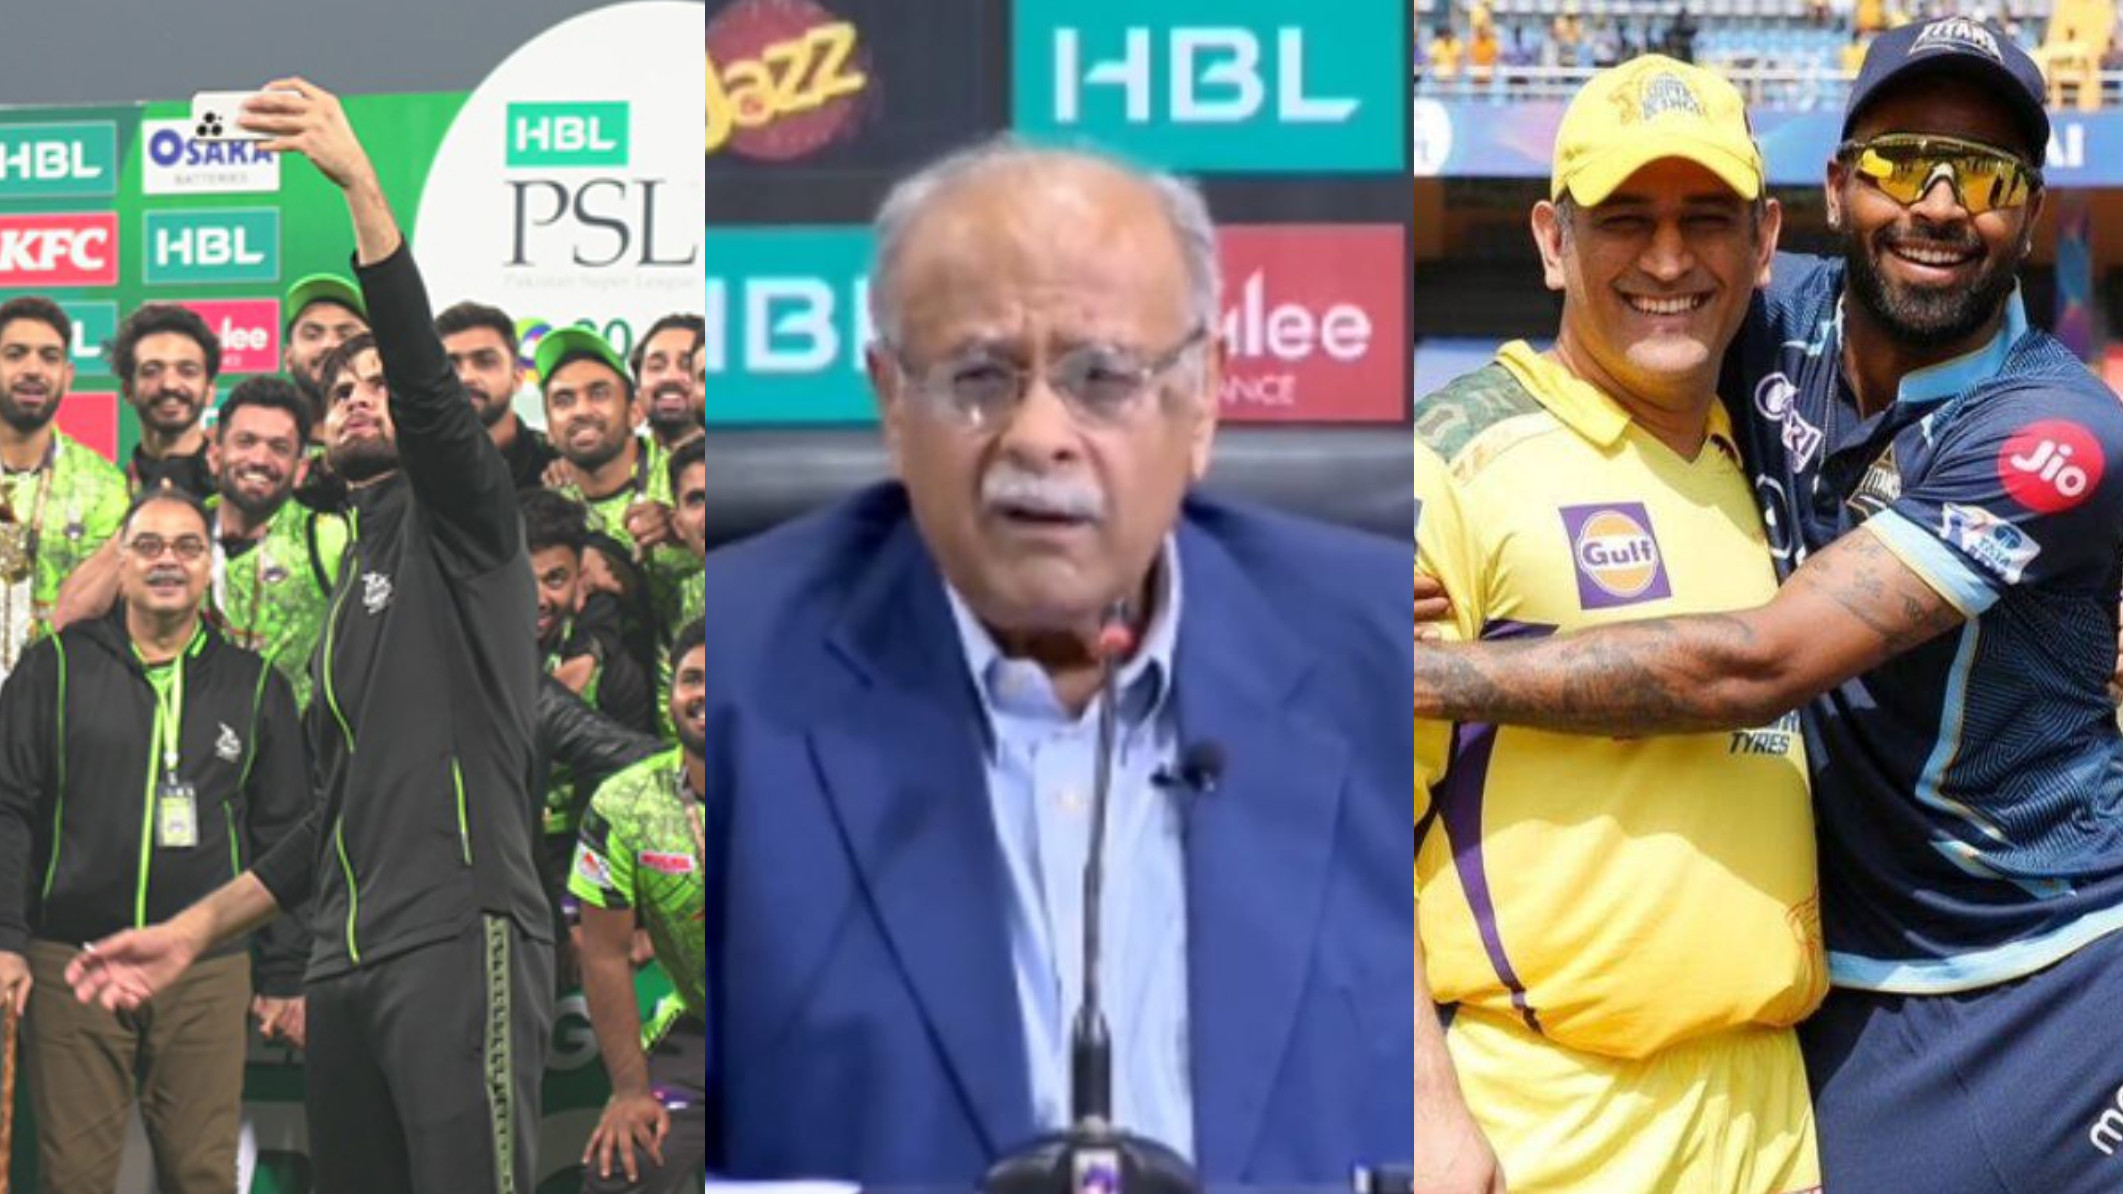 WATCH- “A great success for Pakistan”- PCB chief Najam Sethi on PSL 8’s better digital viewership than IPL